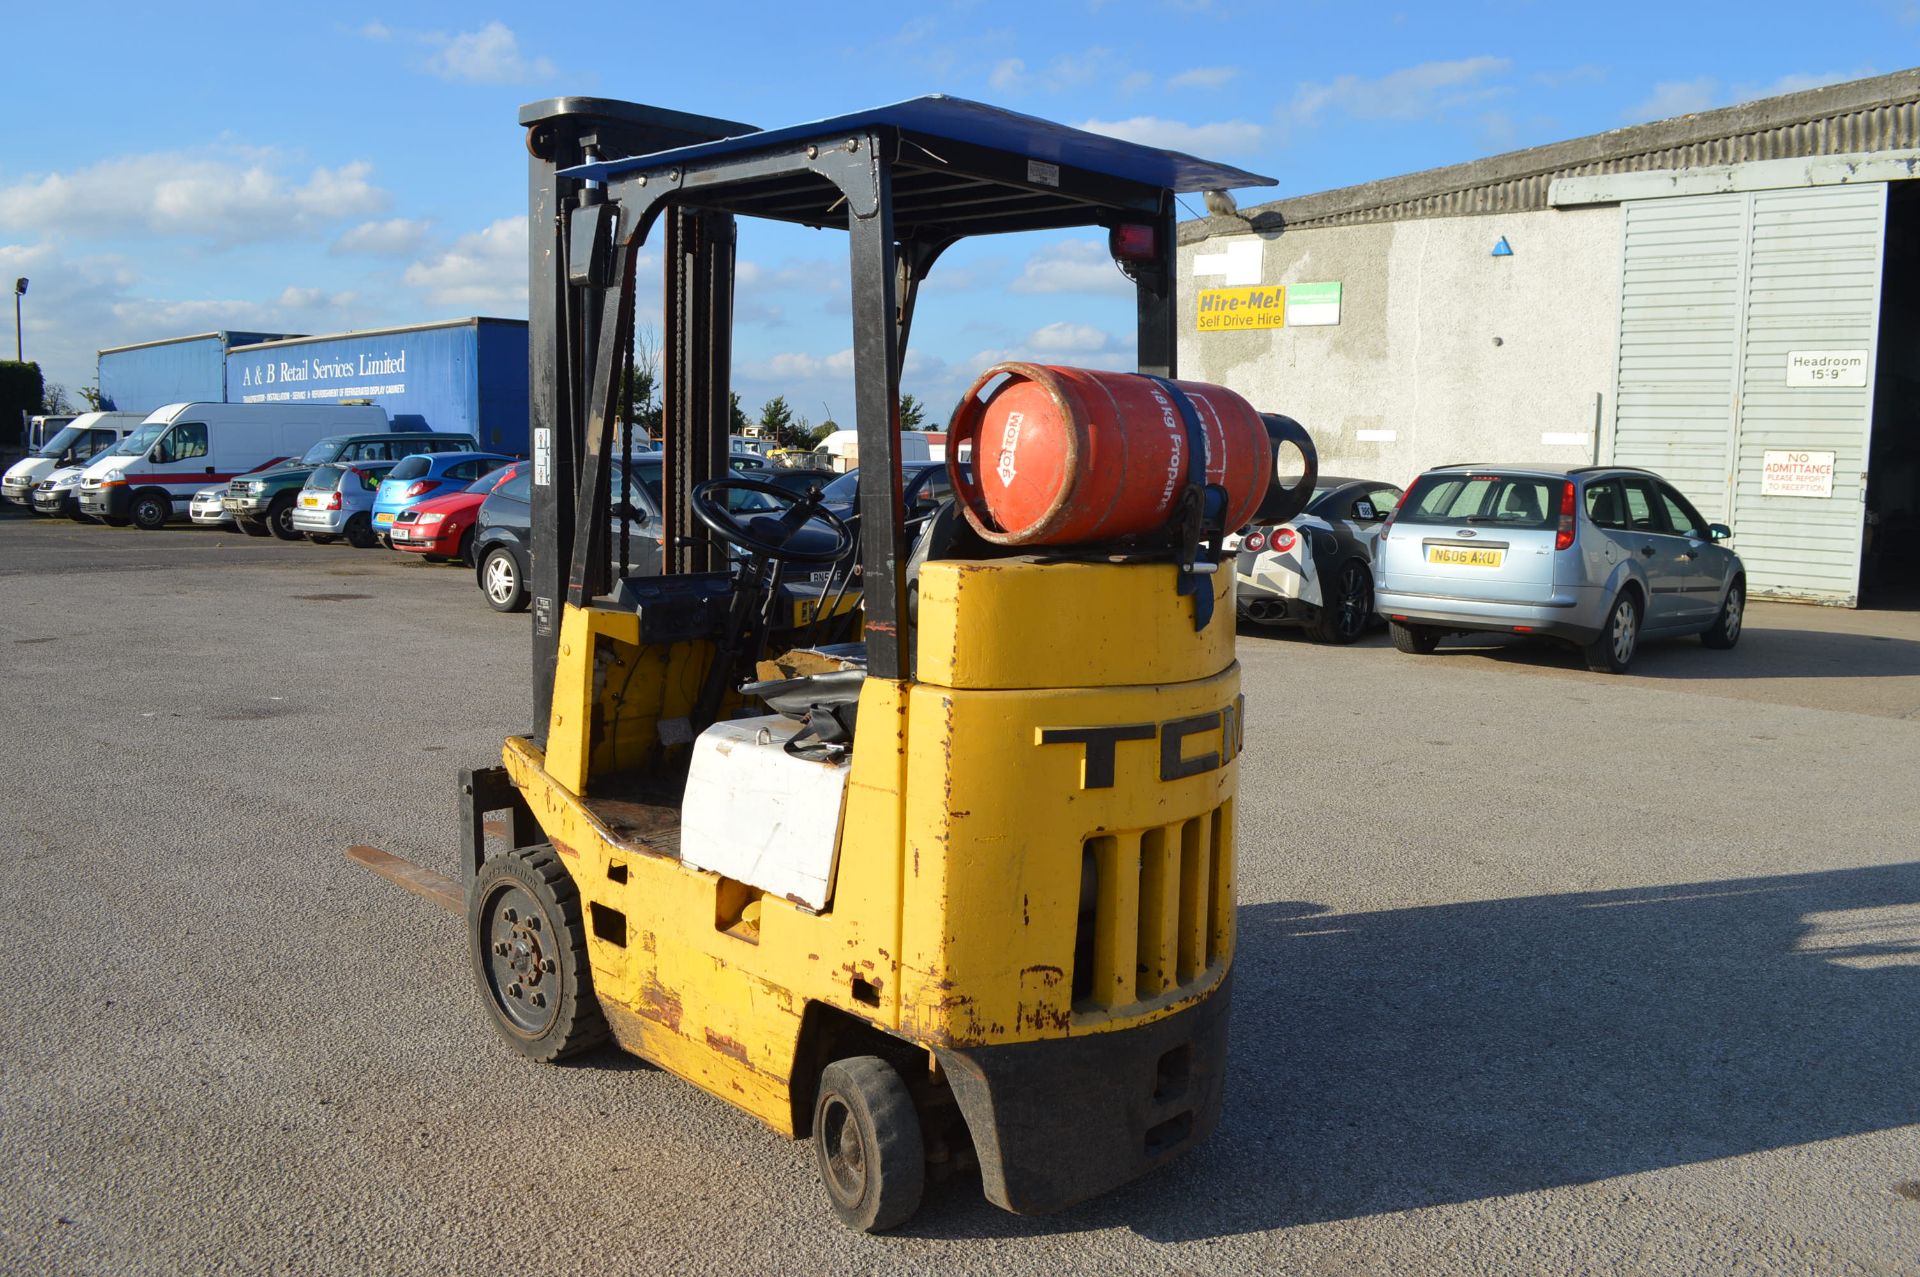 TCM 1.75T LPG FORKLIFT - GAS BOTTLE NOT INCLUDED   BRAKES GOOD RATED CAPACITY: 1600KG MAX FORK - Image 4 of 14